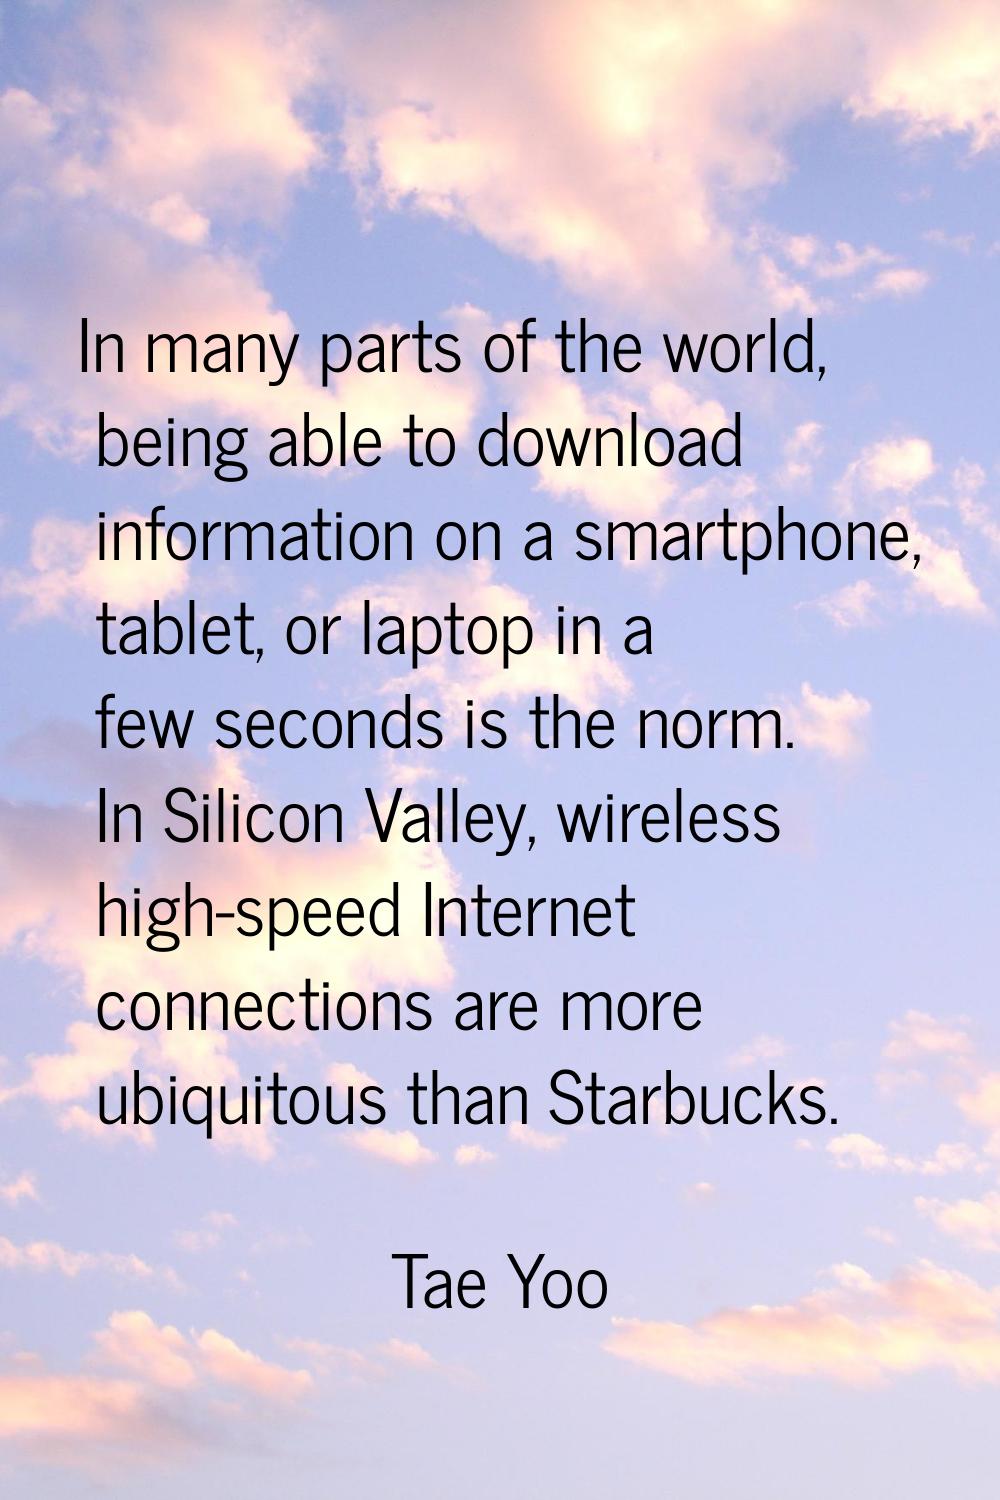 In many parts of the world, being able to download information on a smartphone, tablet, or laptop i